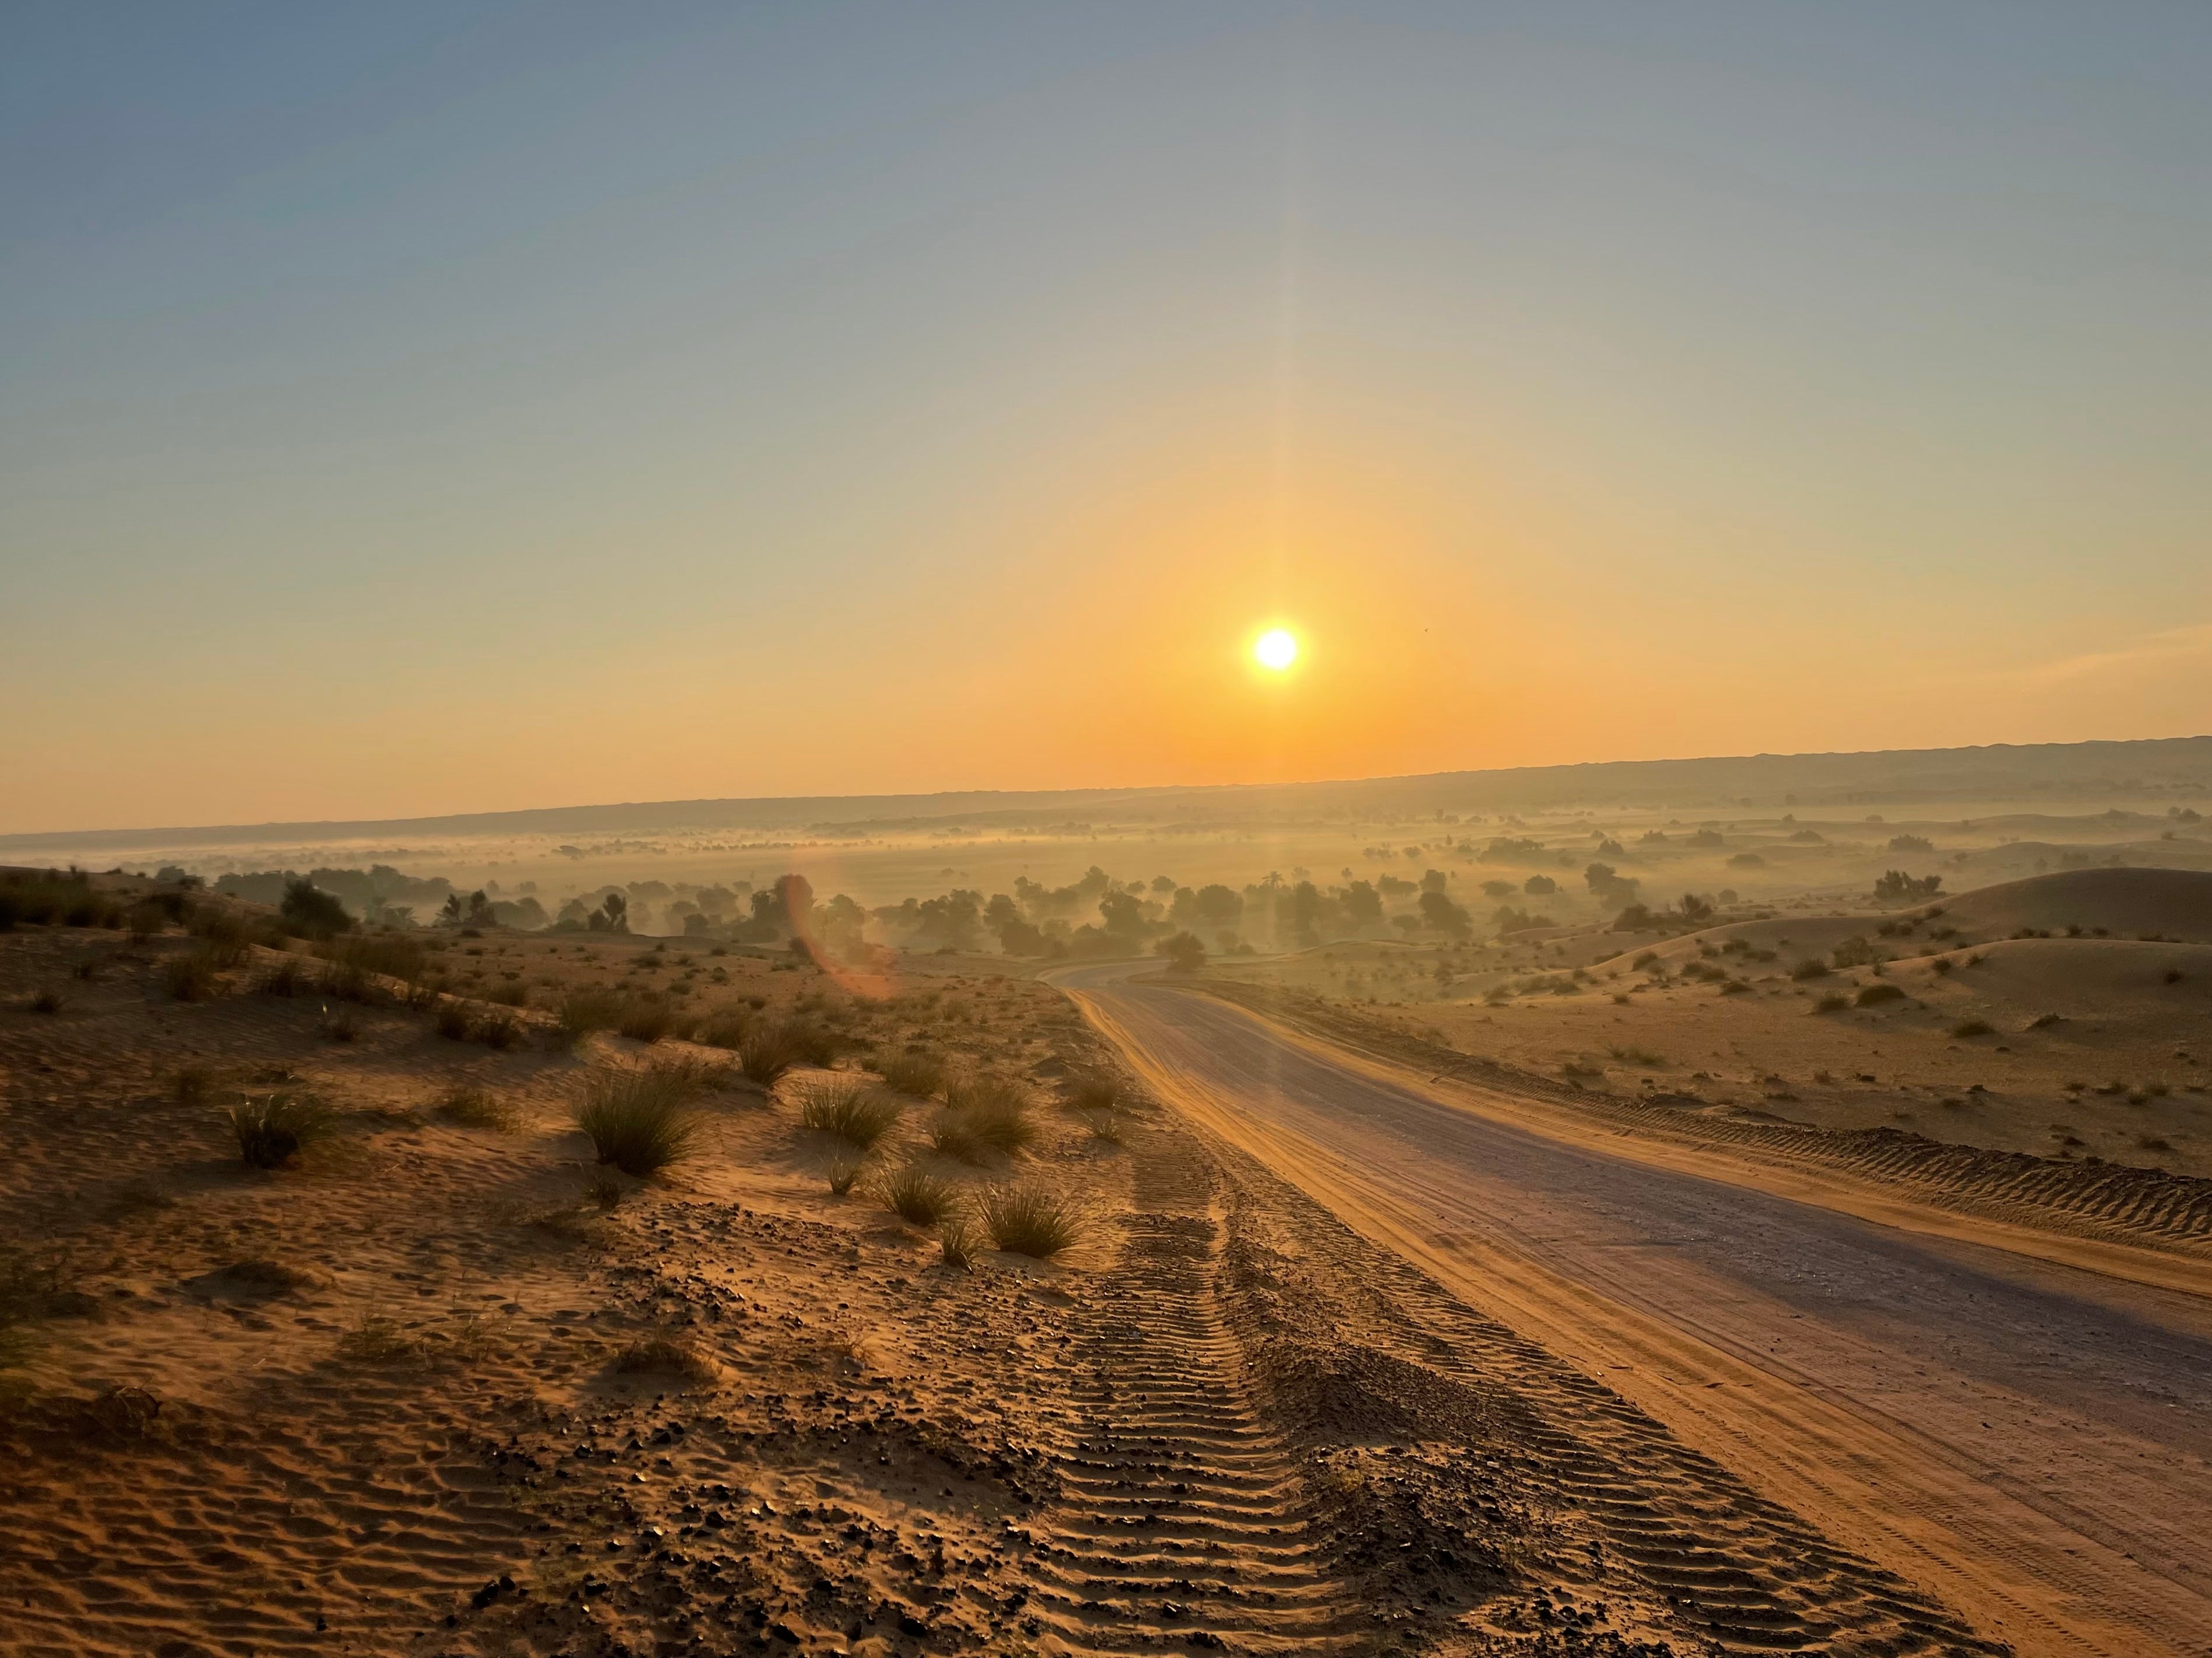 The Dubai Desert Conservation Reserve is a pristine patch of wilderness just outside the metropolis